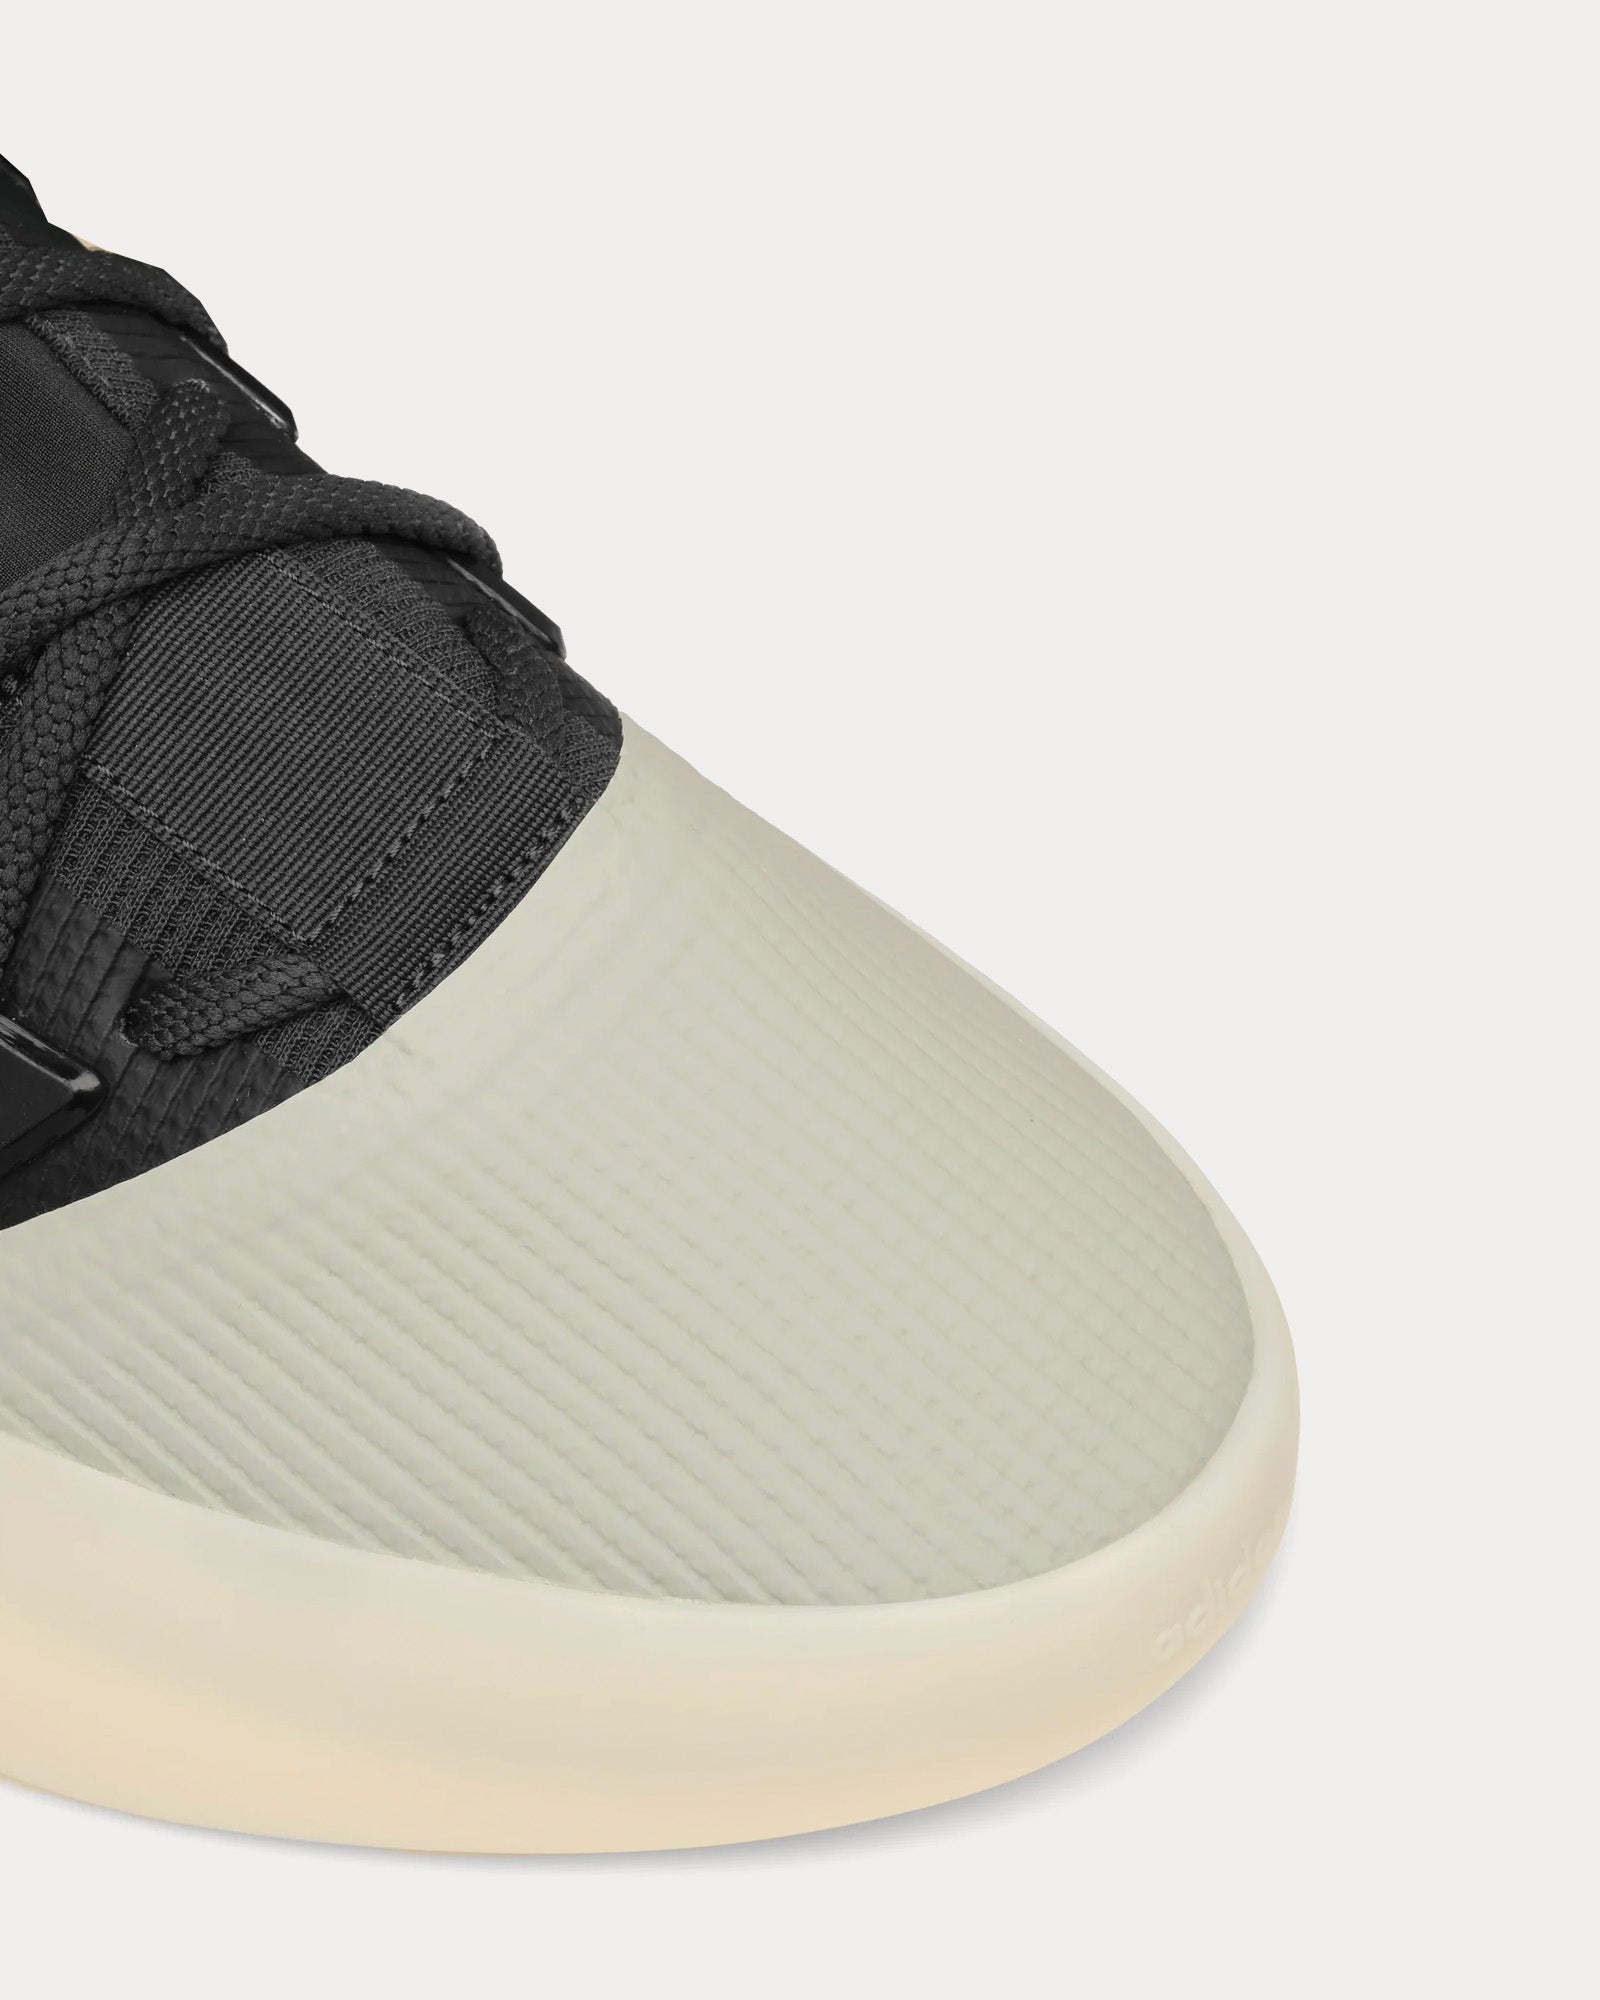 Fear of God Athletics - I Basketball Carbon / Sesame High Top Sneakers